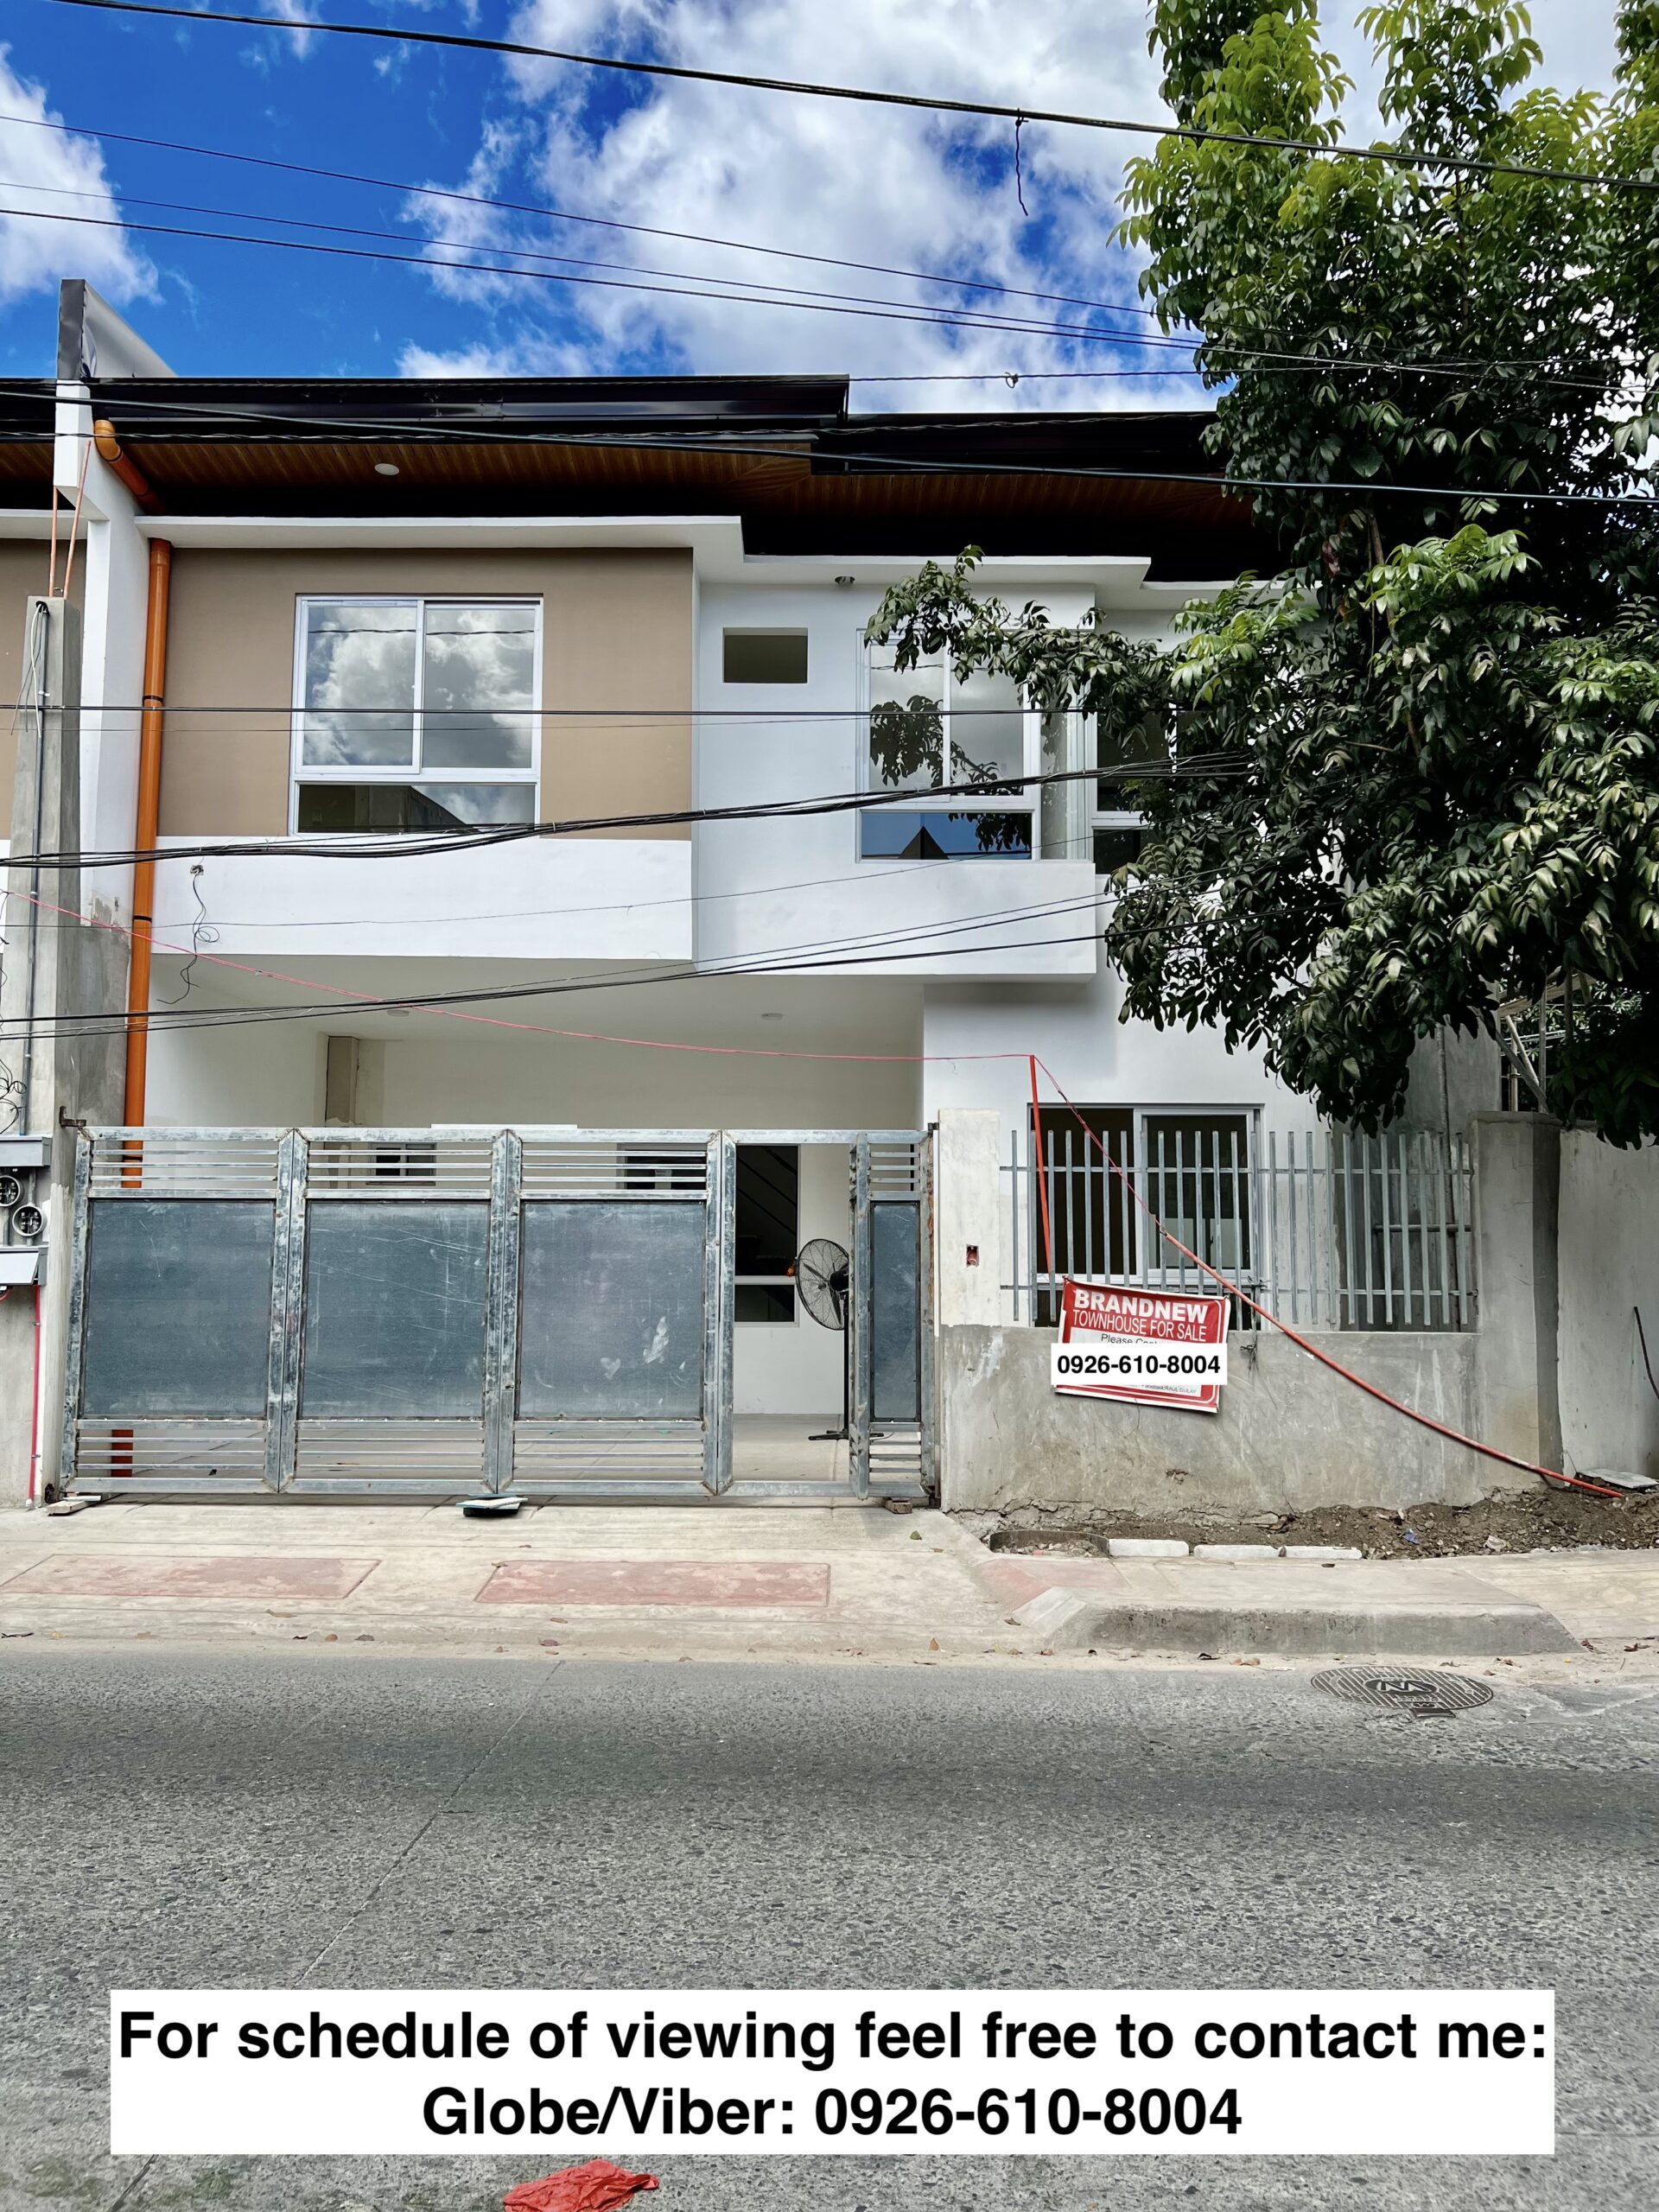 House and Lot For Sale in QC Brandnew RFO Front unit 3BR w/ 2 Parking near FEU Hospital, Dahlia ave